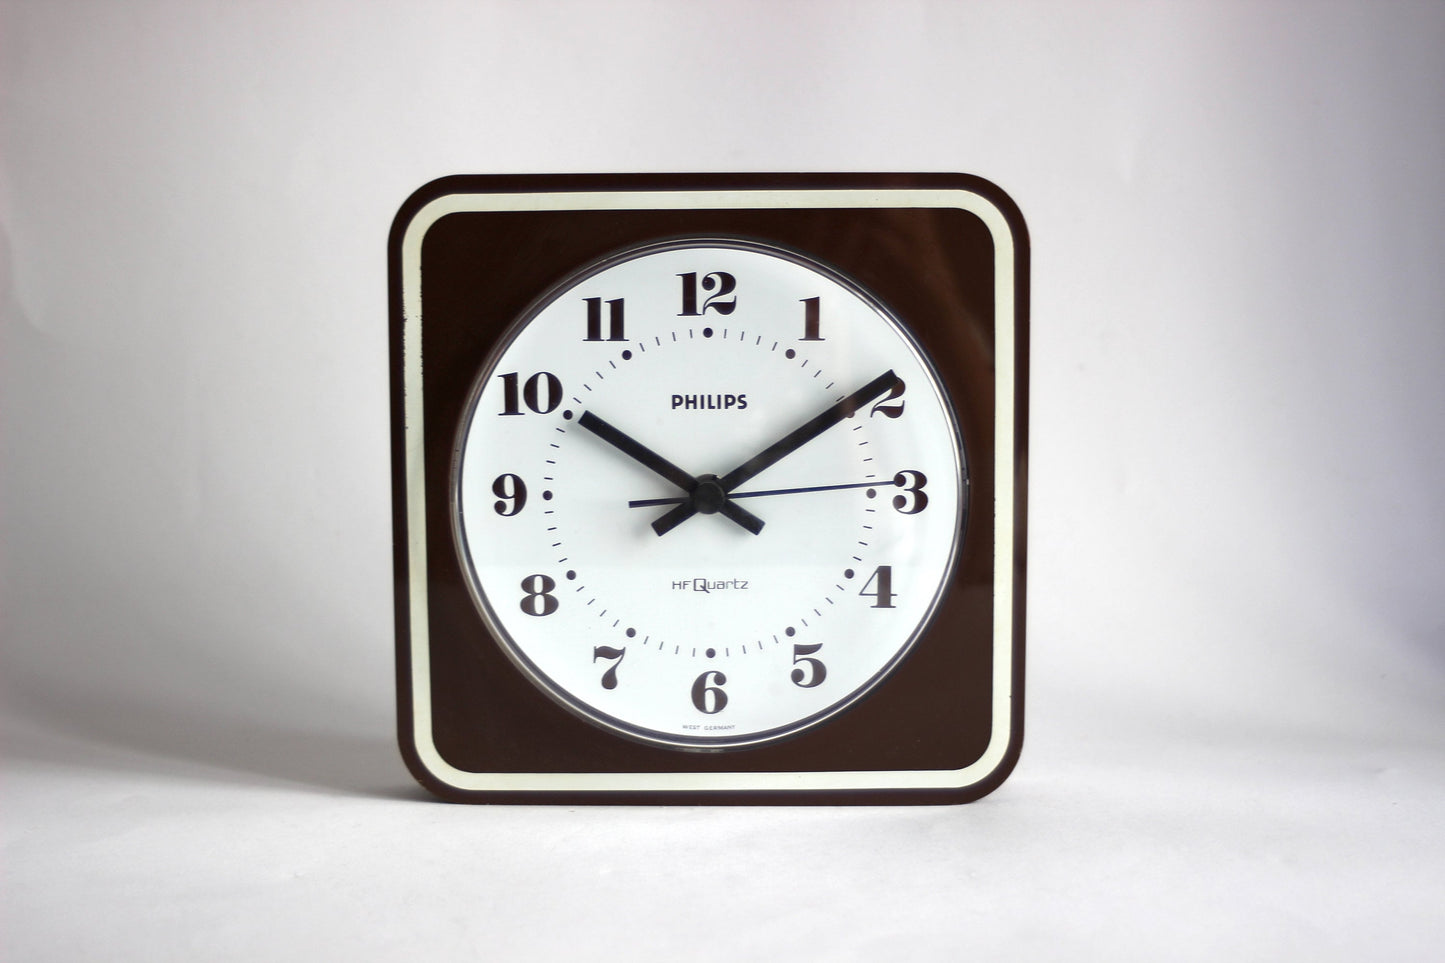 Vintage Philips wall HF quartz clock, model HR5471, retro mid-century design from the 1970s, West Germany.